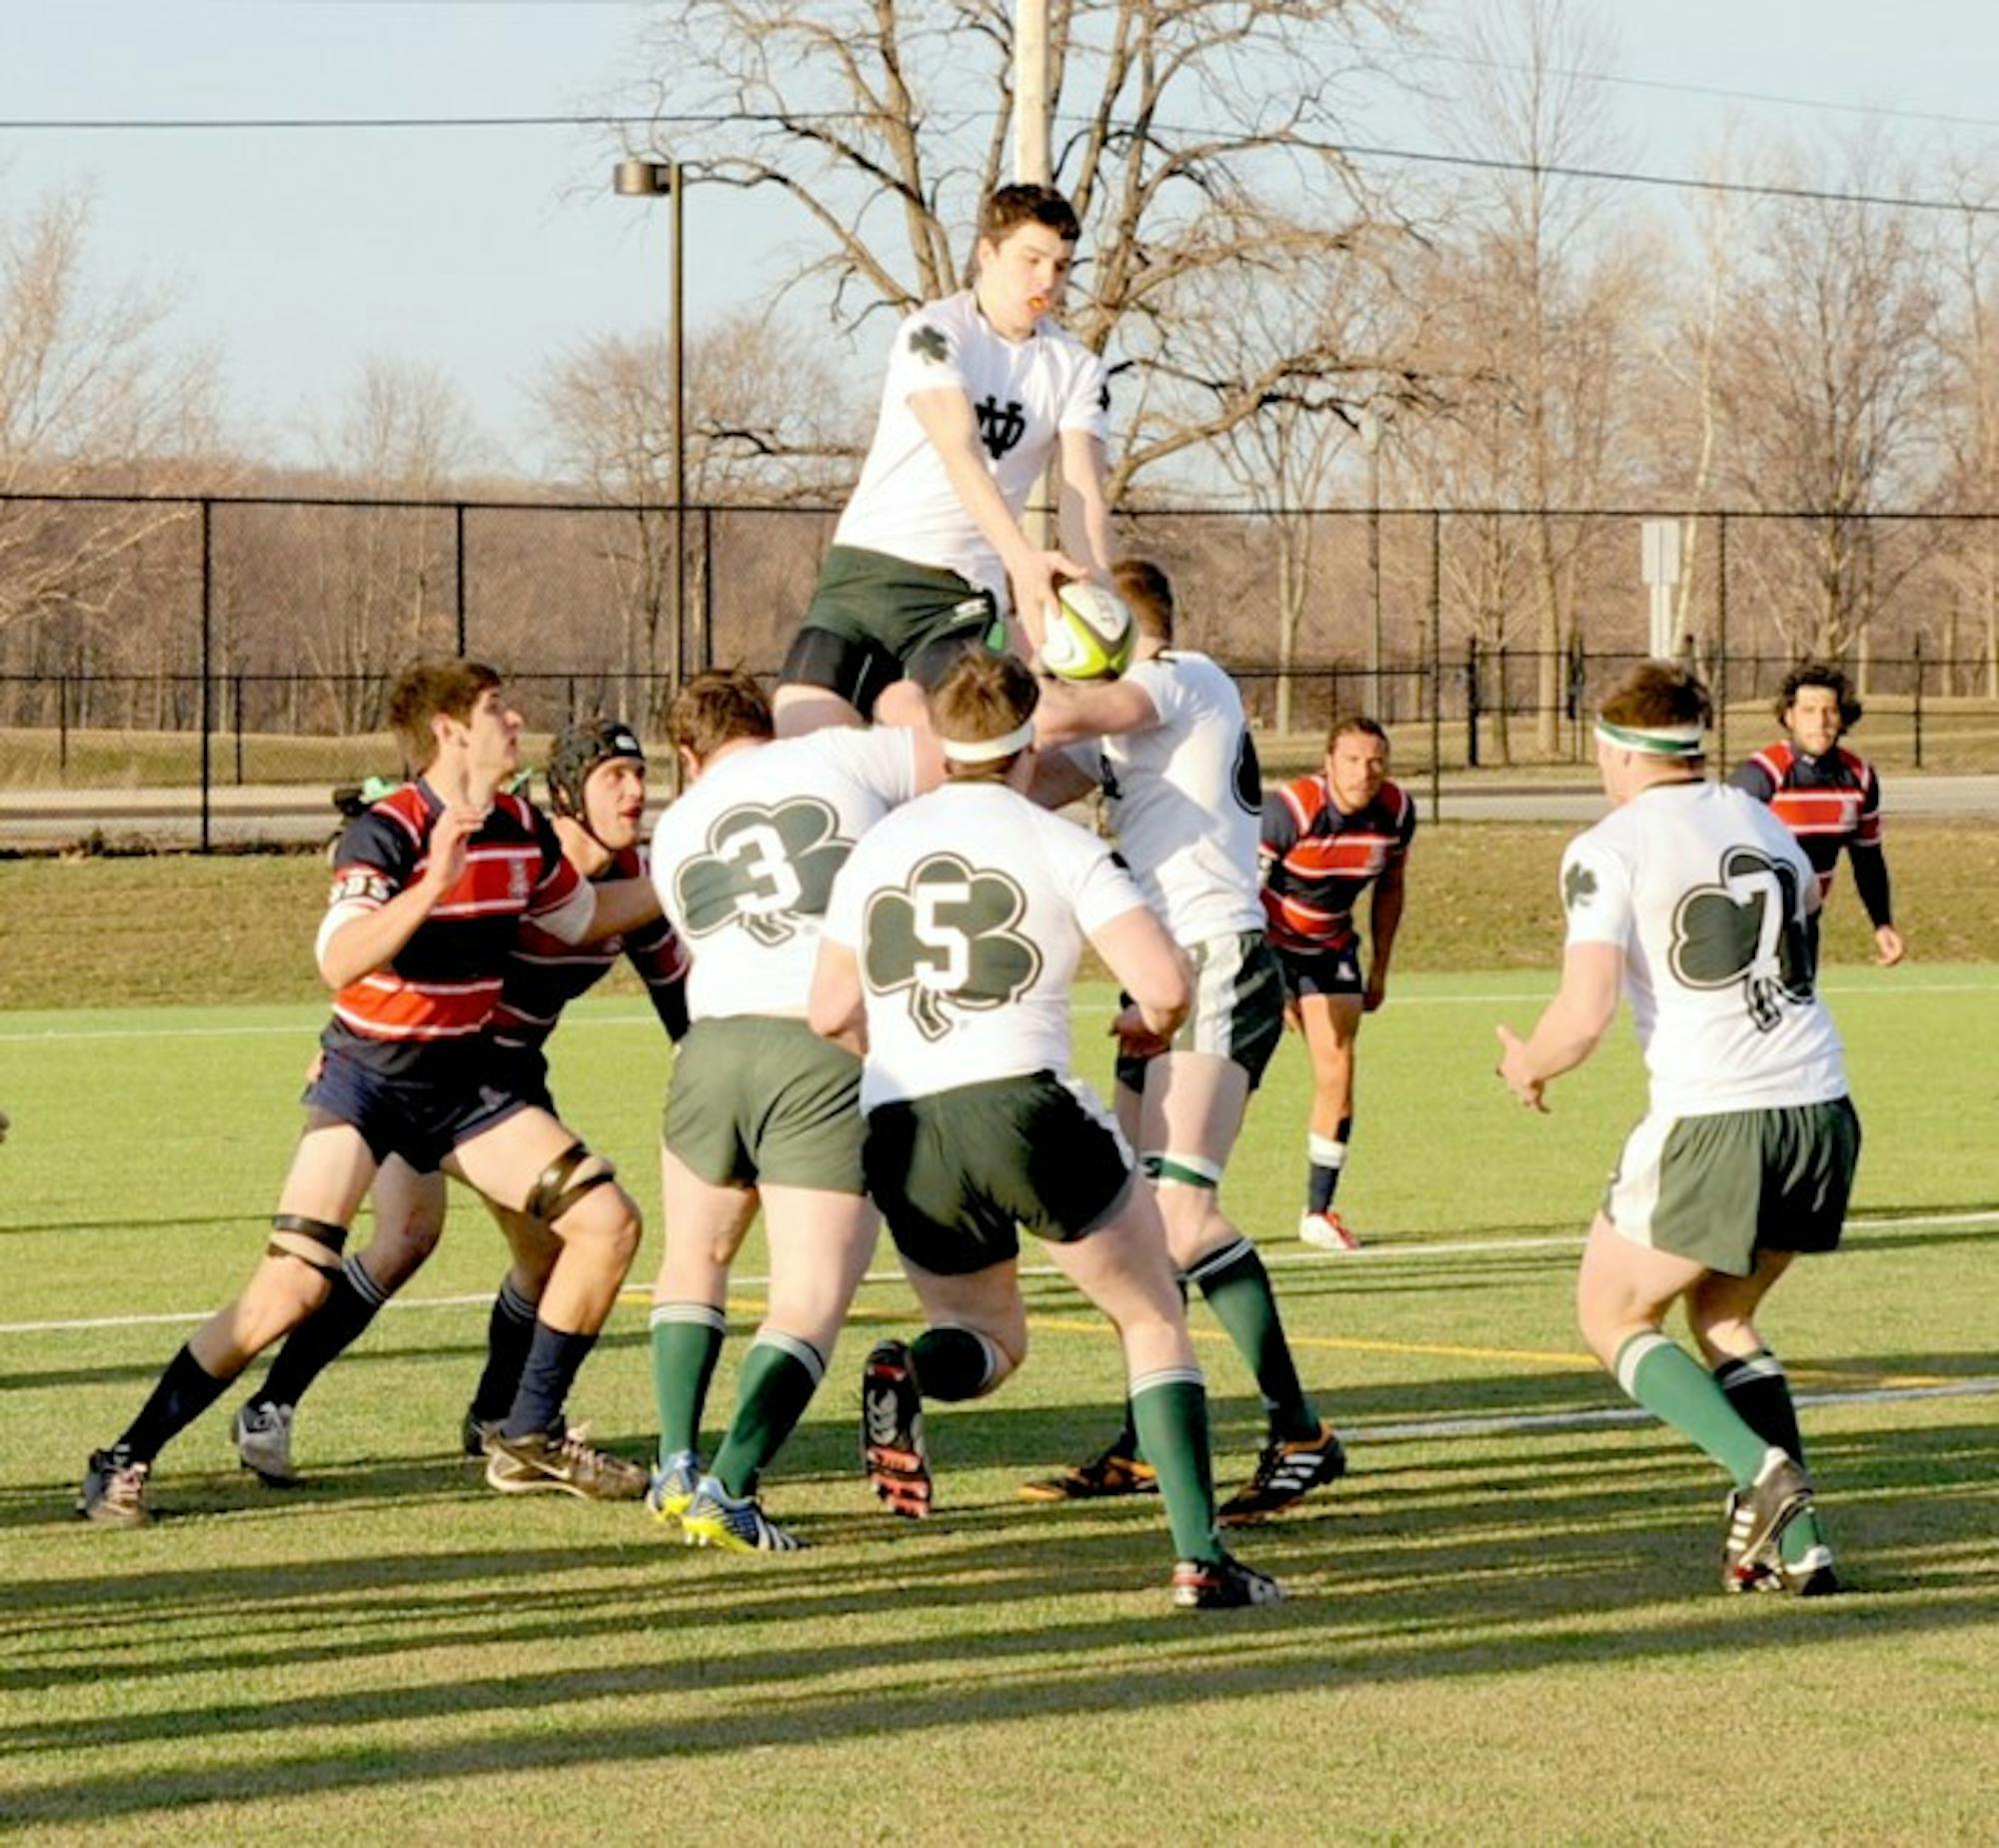 Irish and Arizona rugby players battle for the ball during the Parseghian Cup.